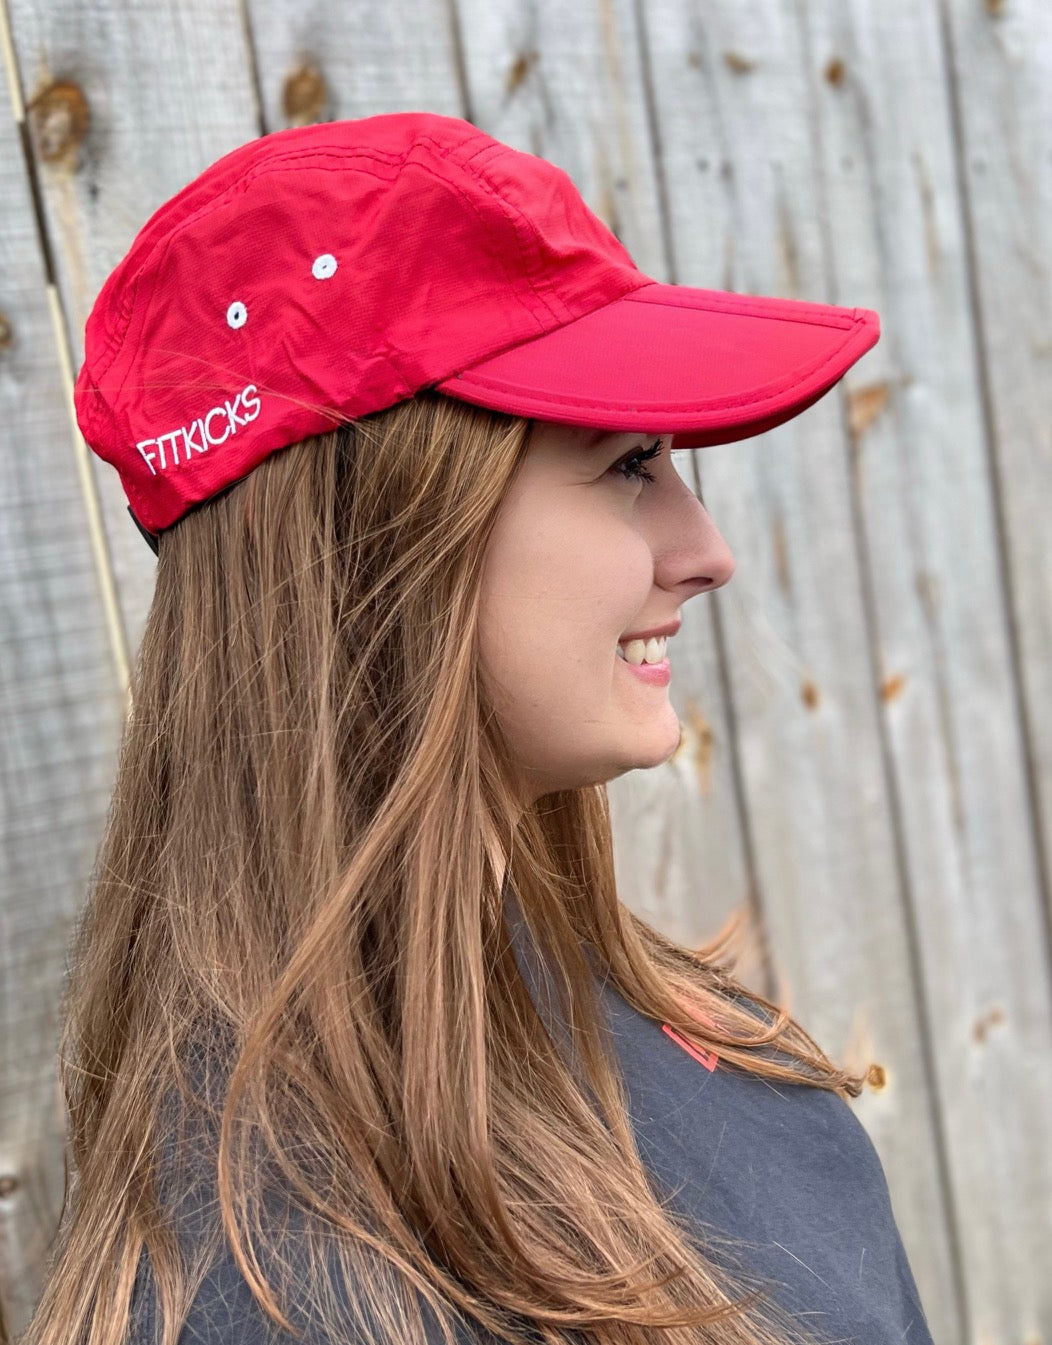 FITKICKS Folding Cap- Red